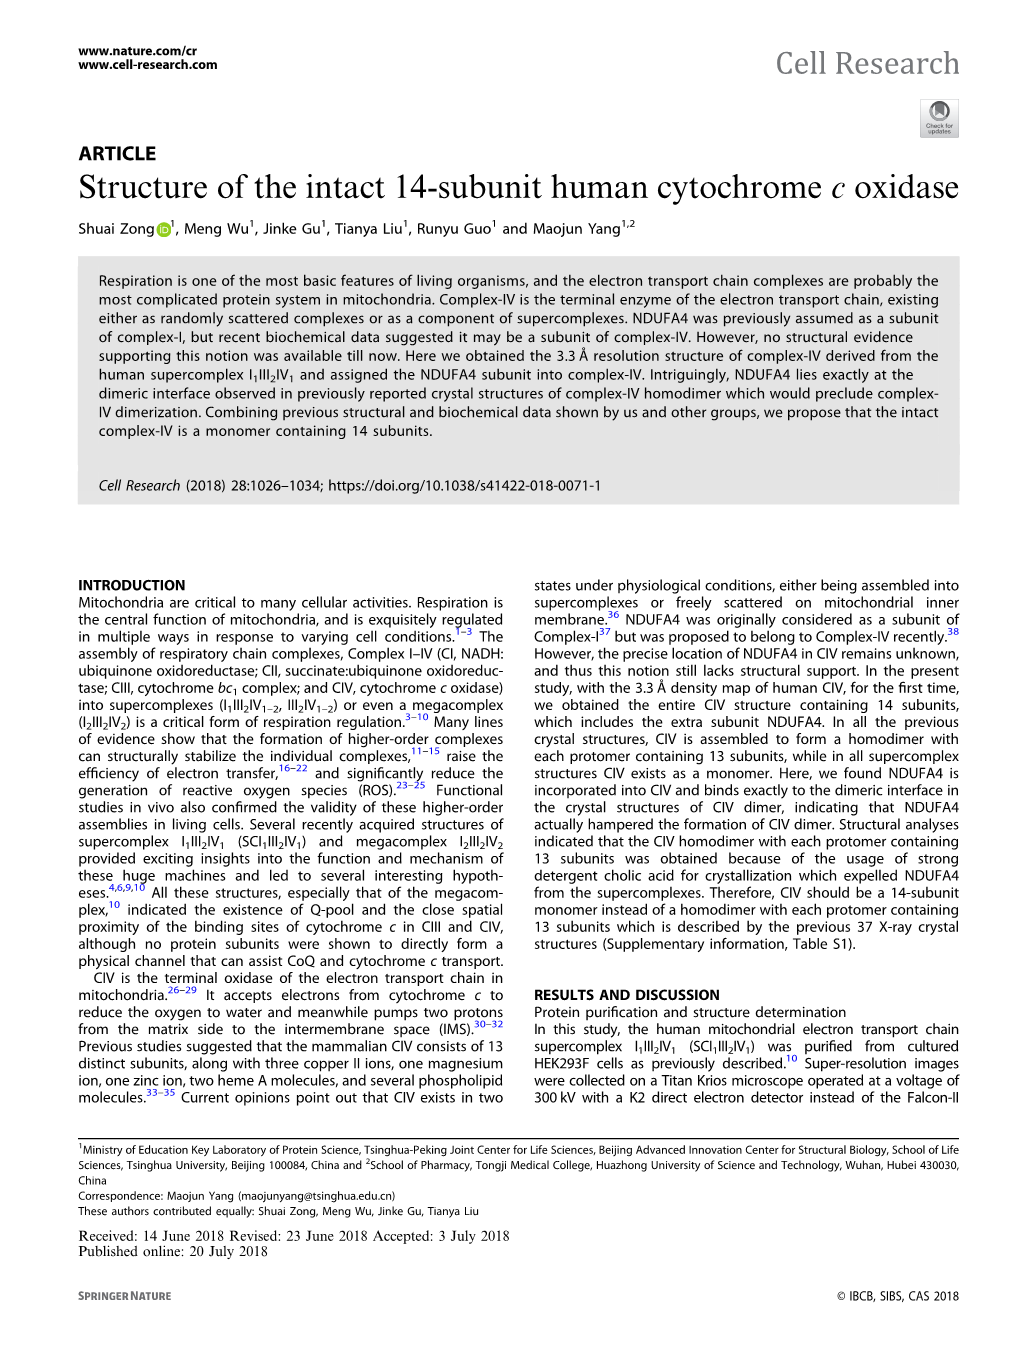 Structure of the Intact 14-Subunit Human Cytochrome C Oxidase